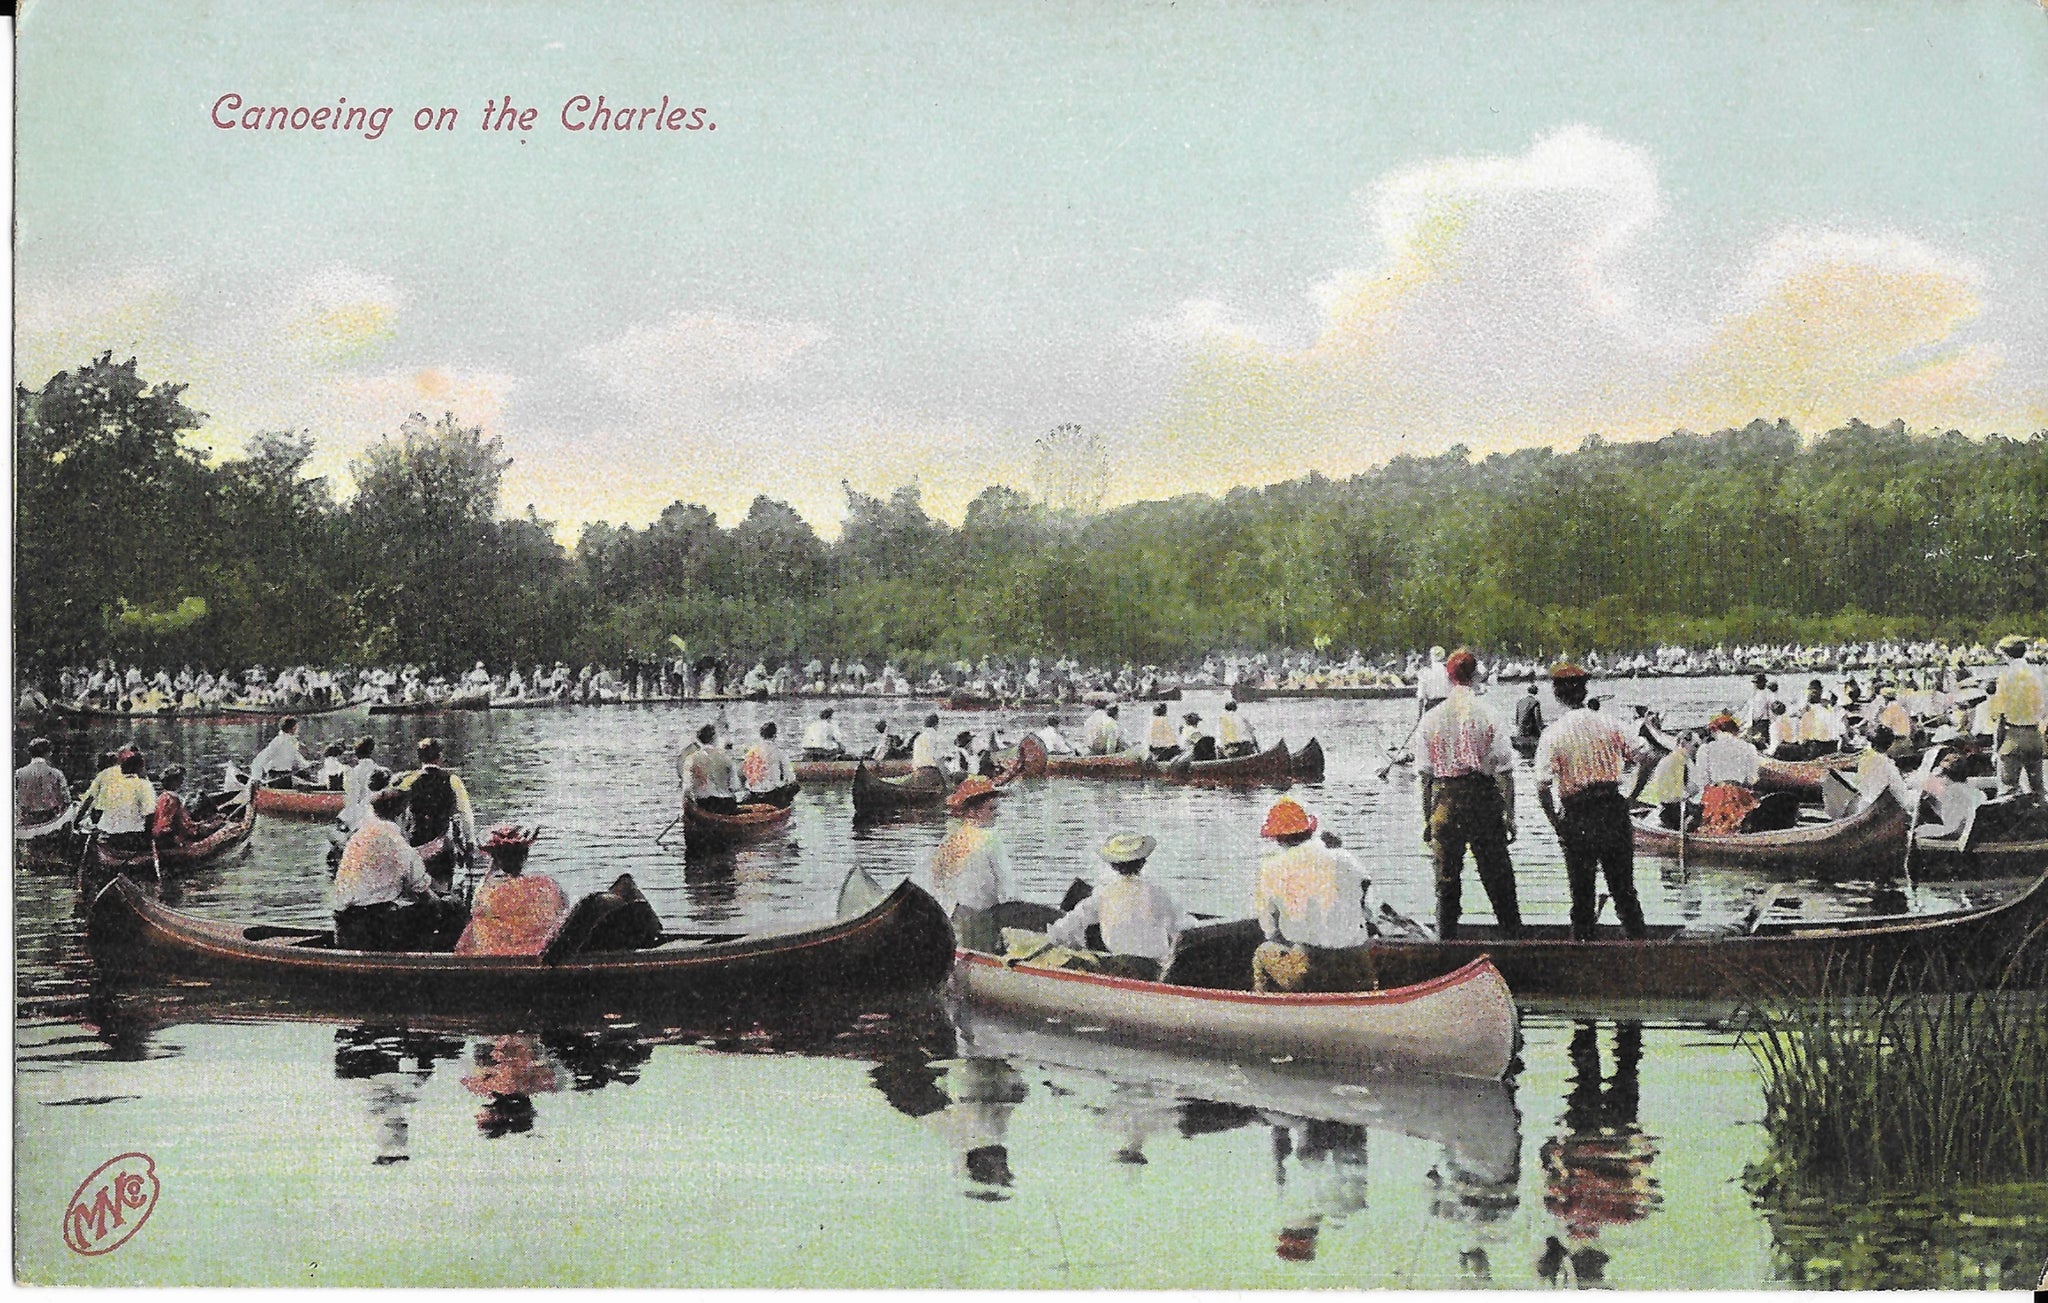 Antique Photo Postcard "Canoeing on the Charles"